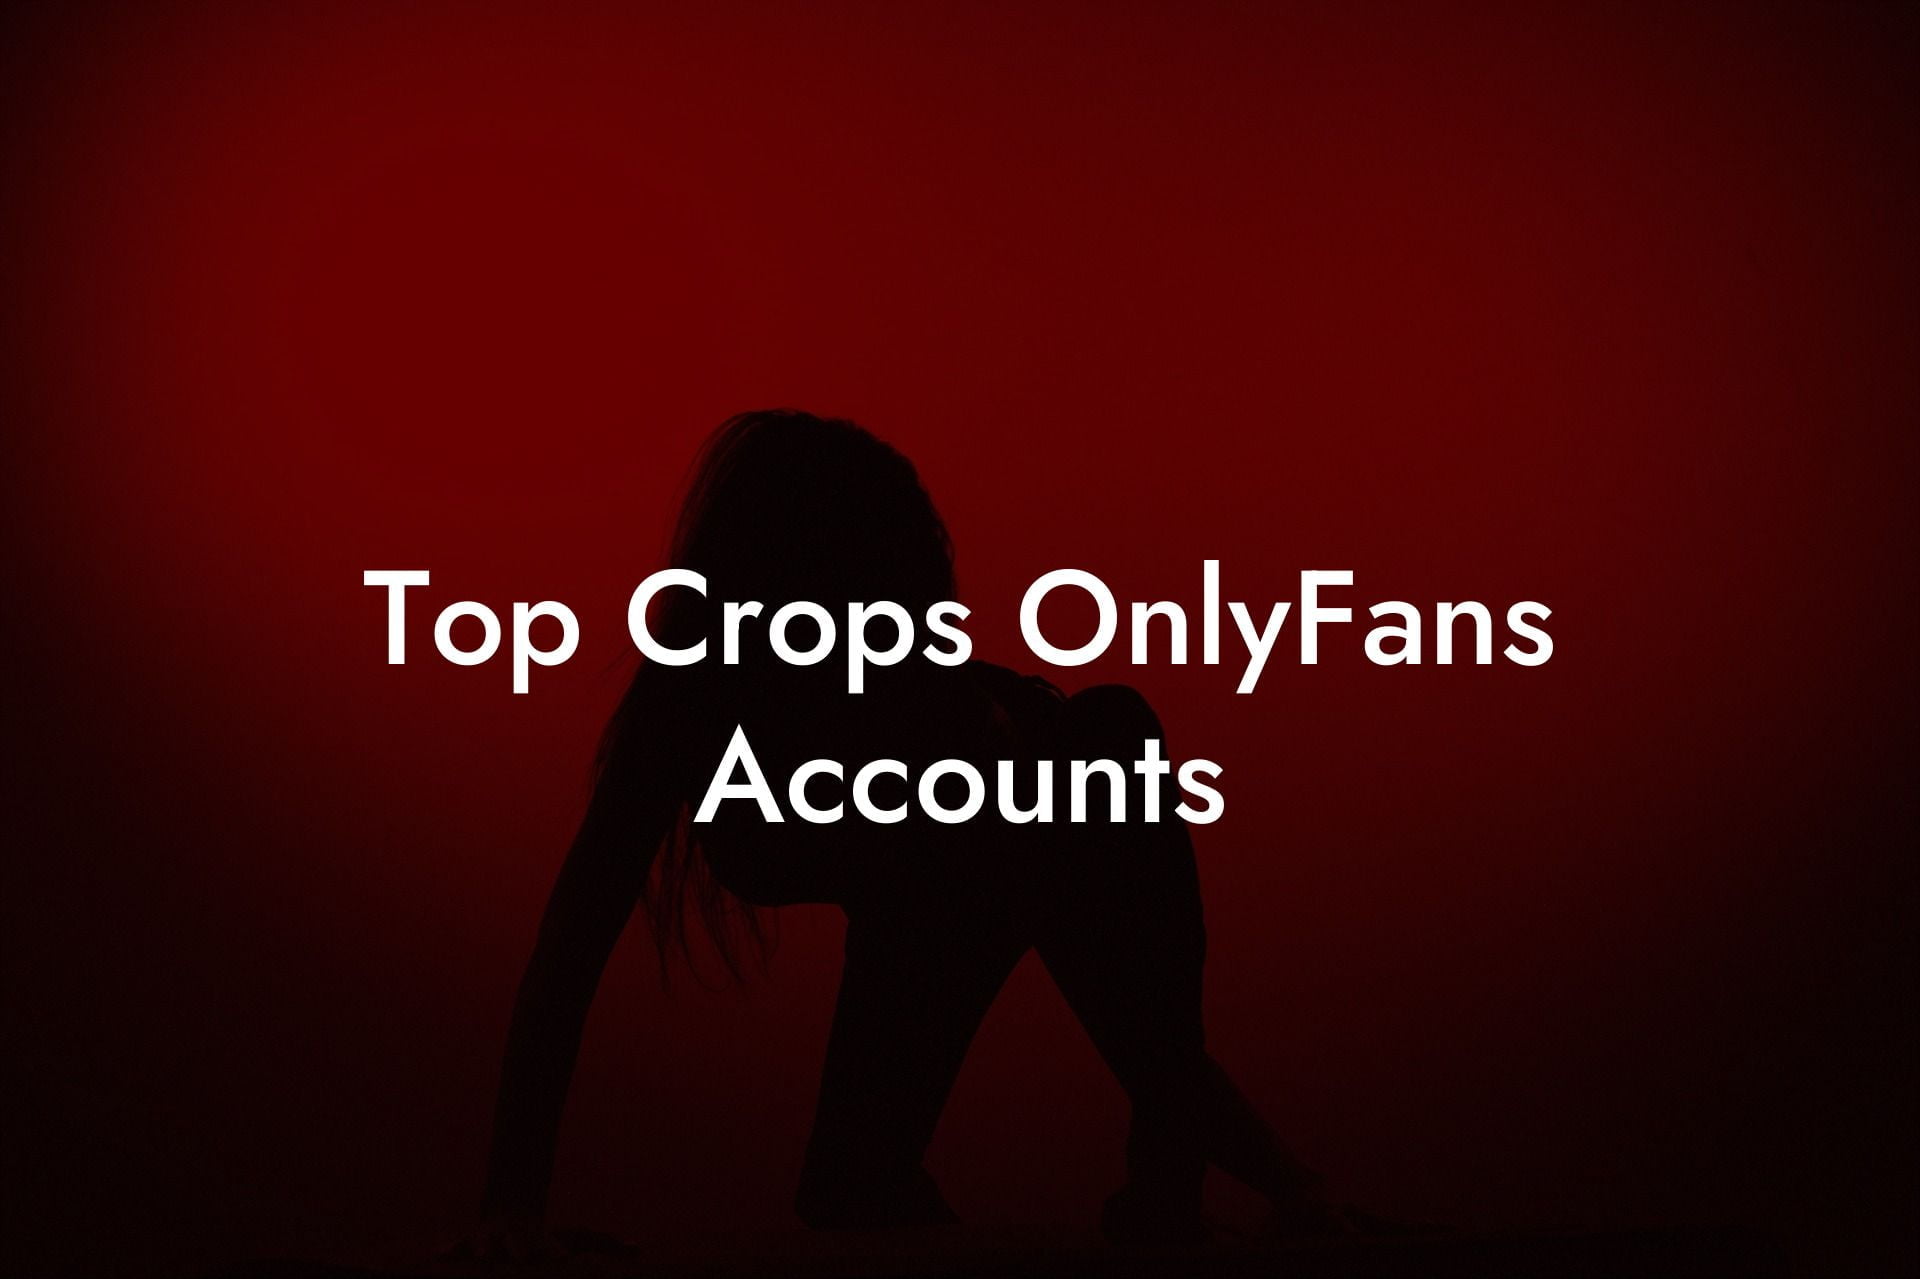 Top Crops OnlyFans Accounts